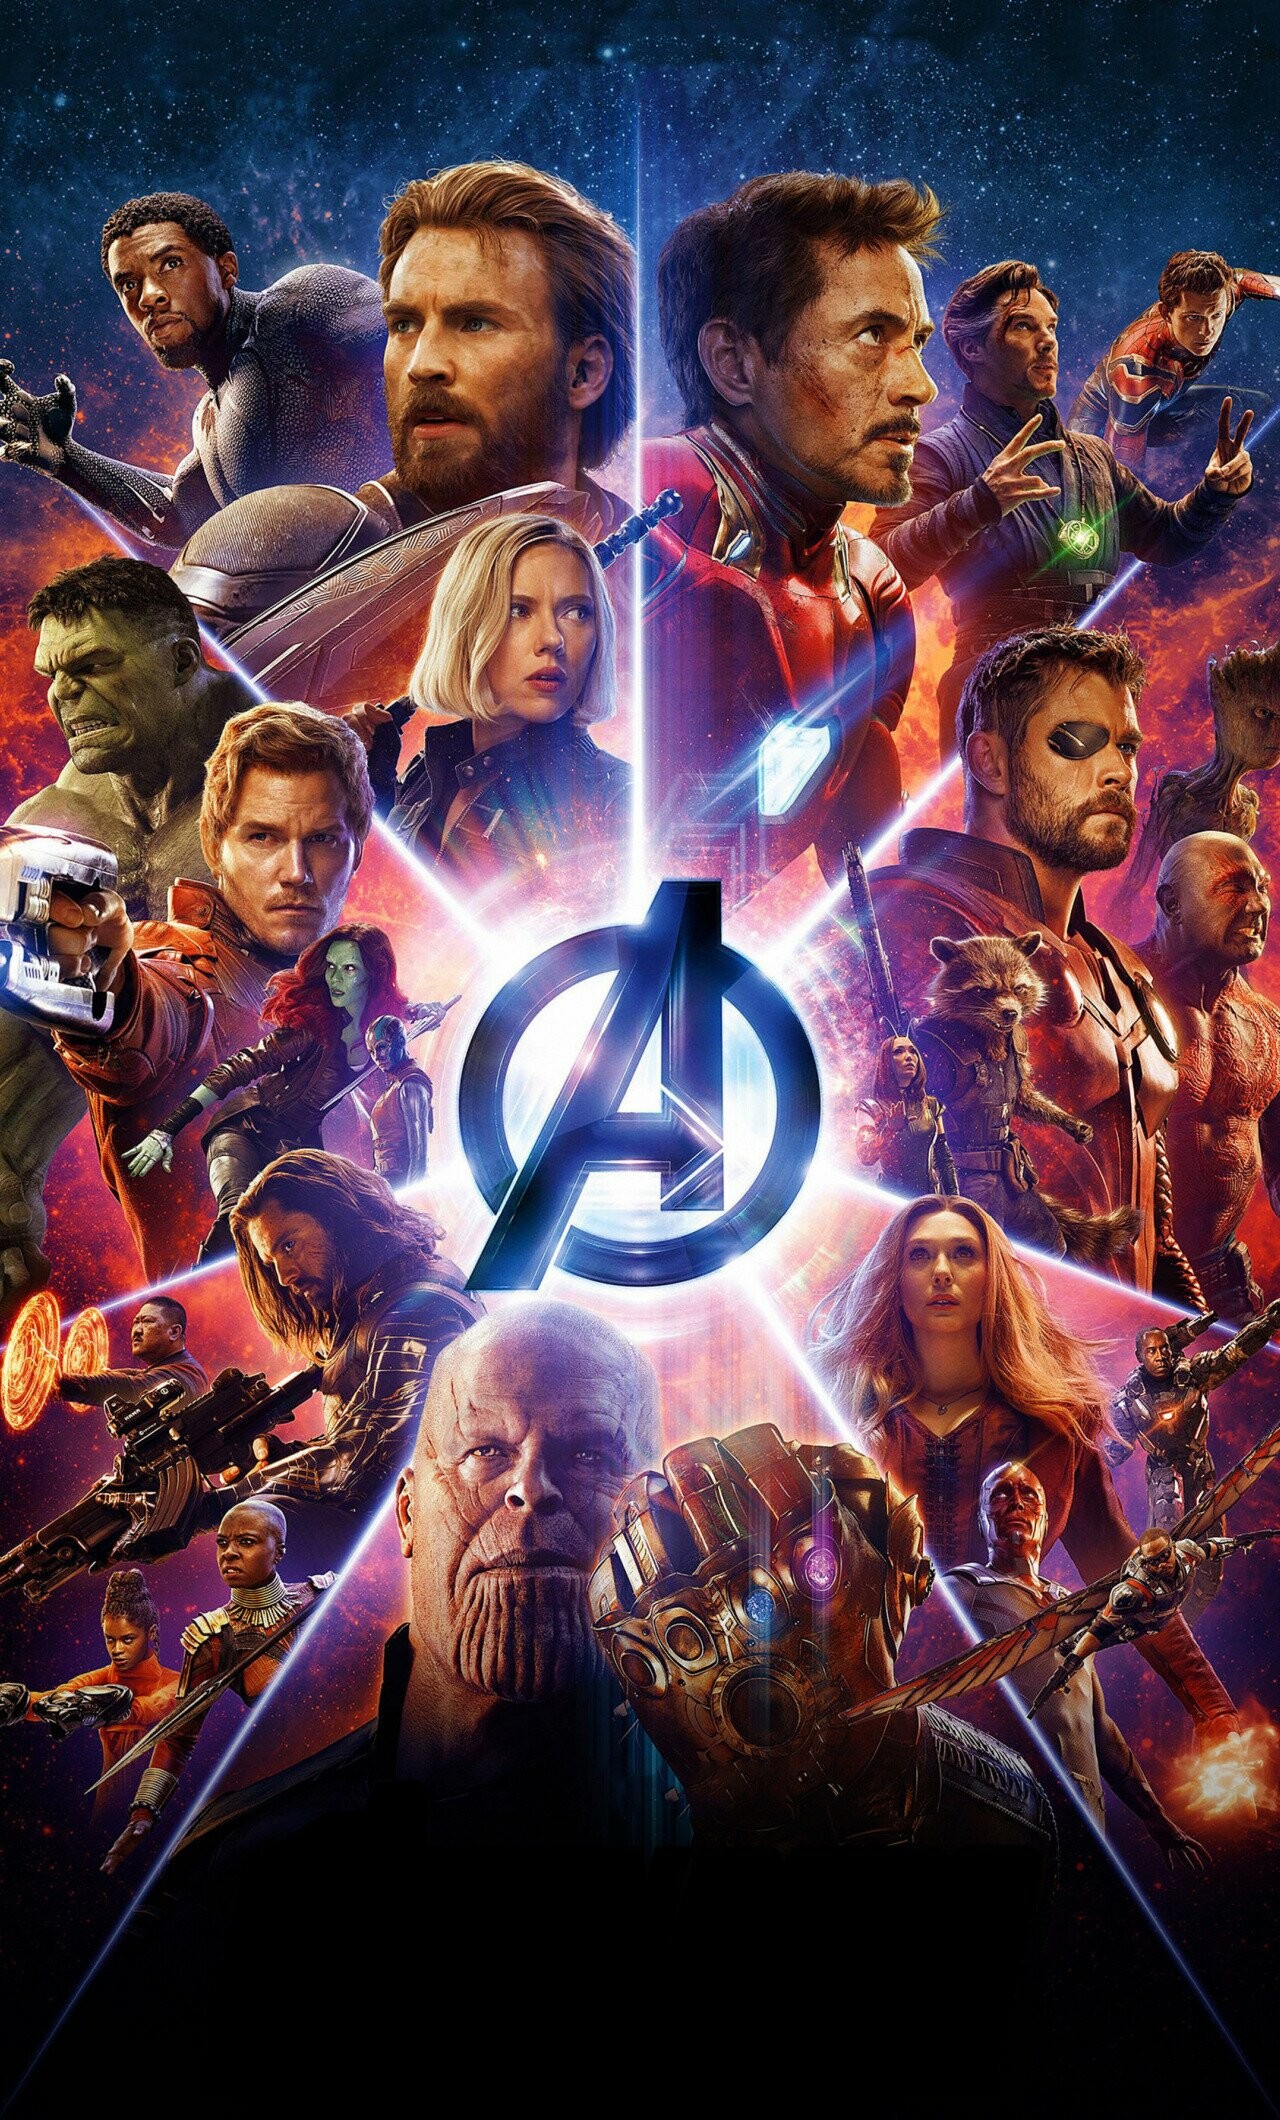 Avengers: The marketing campaign for Endgame cost over $200 million, the most for any Marvel Studios film. 1280x2120 HD Background.